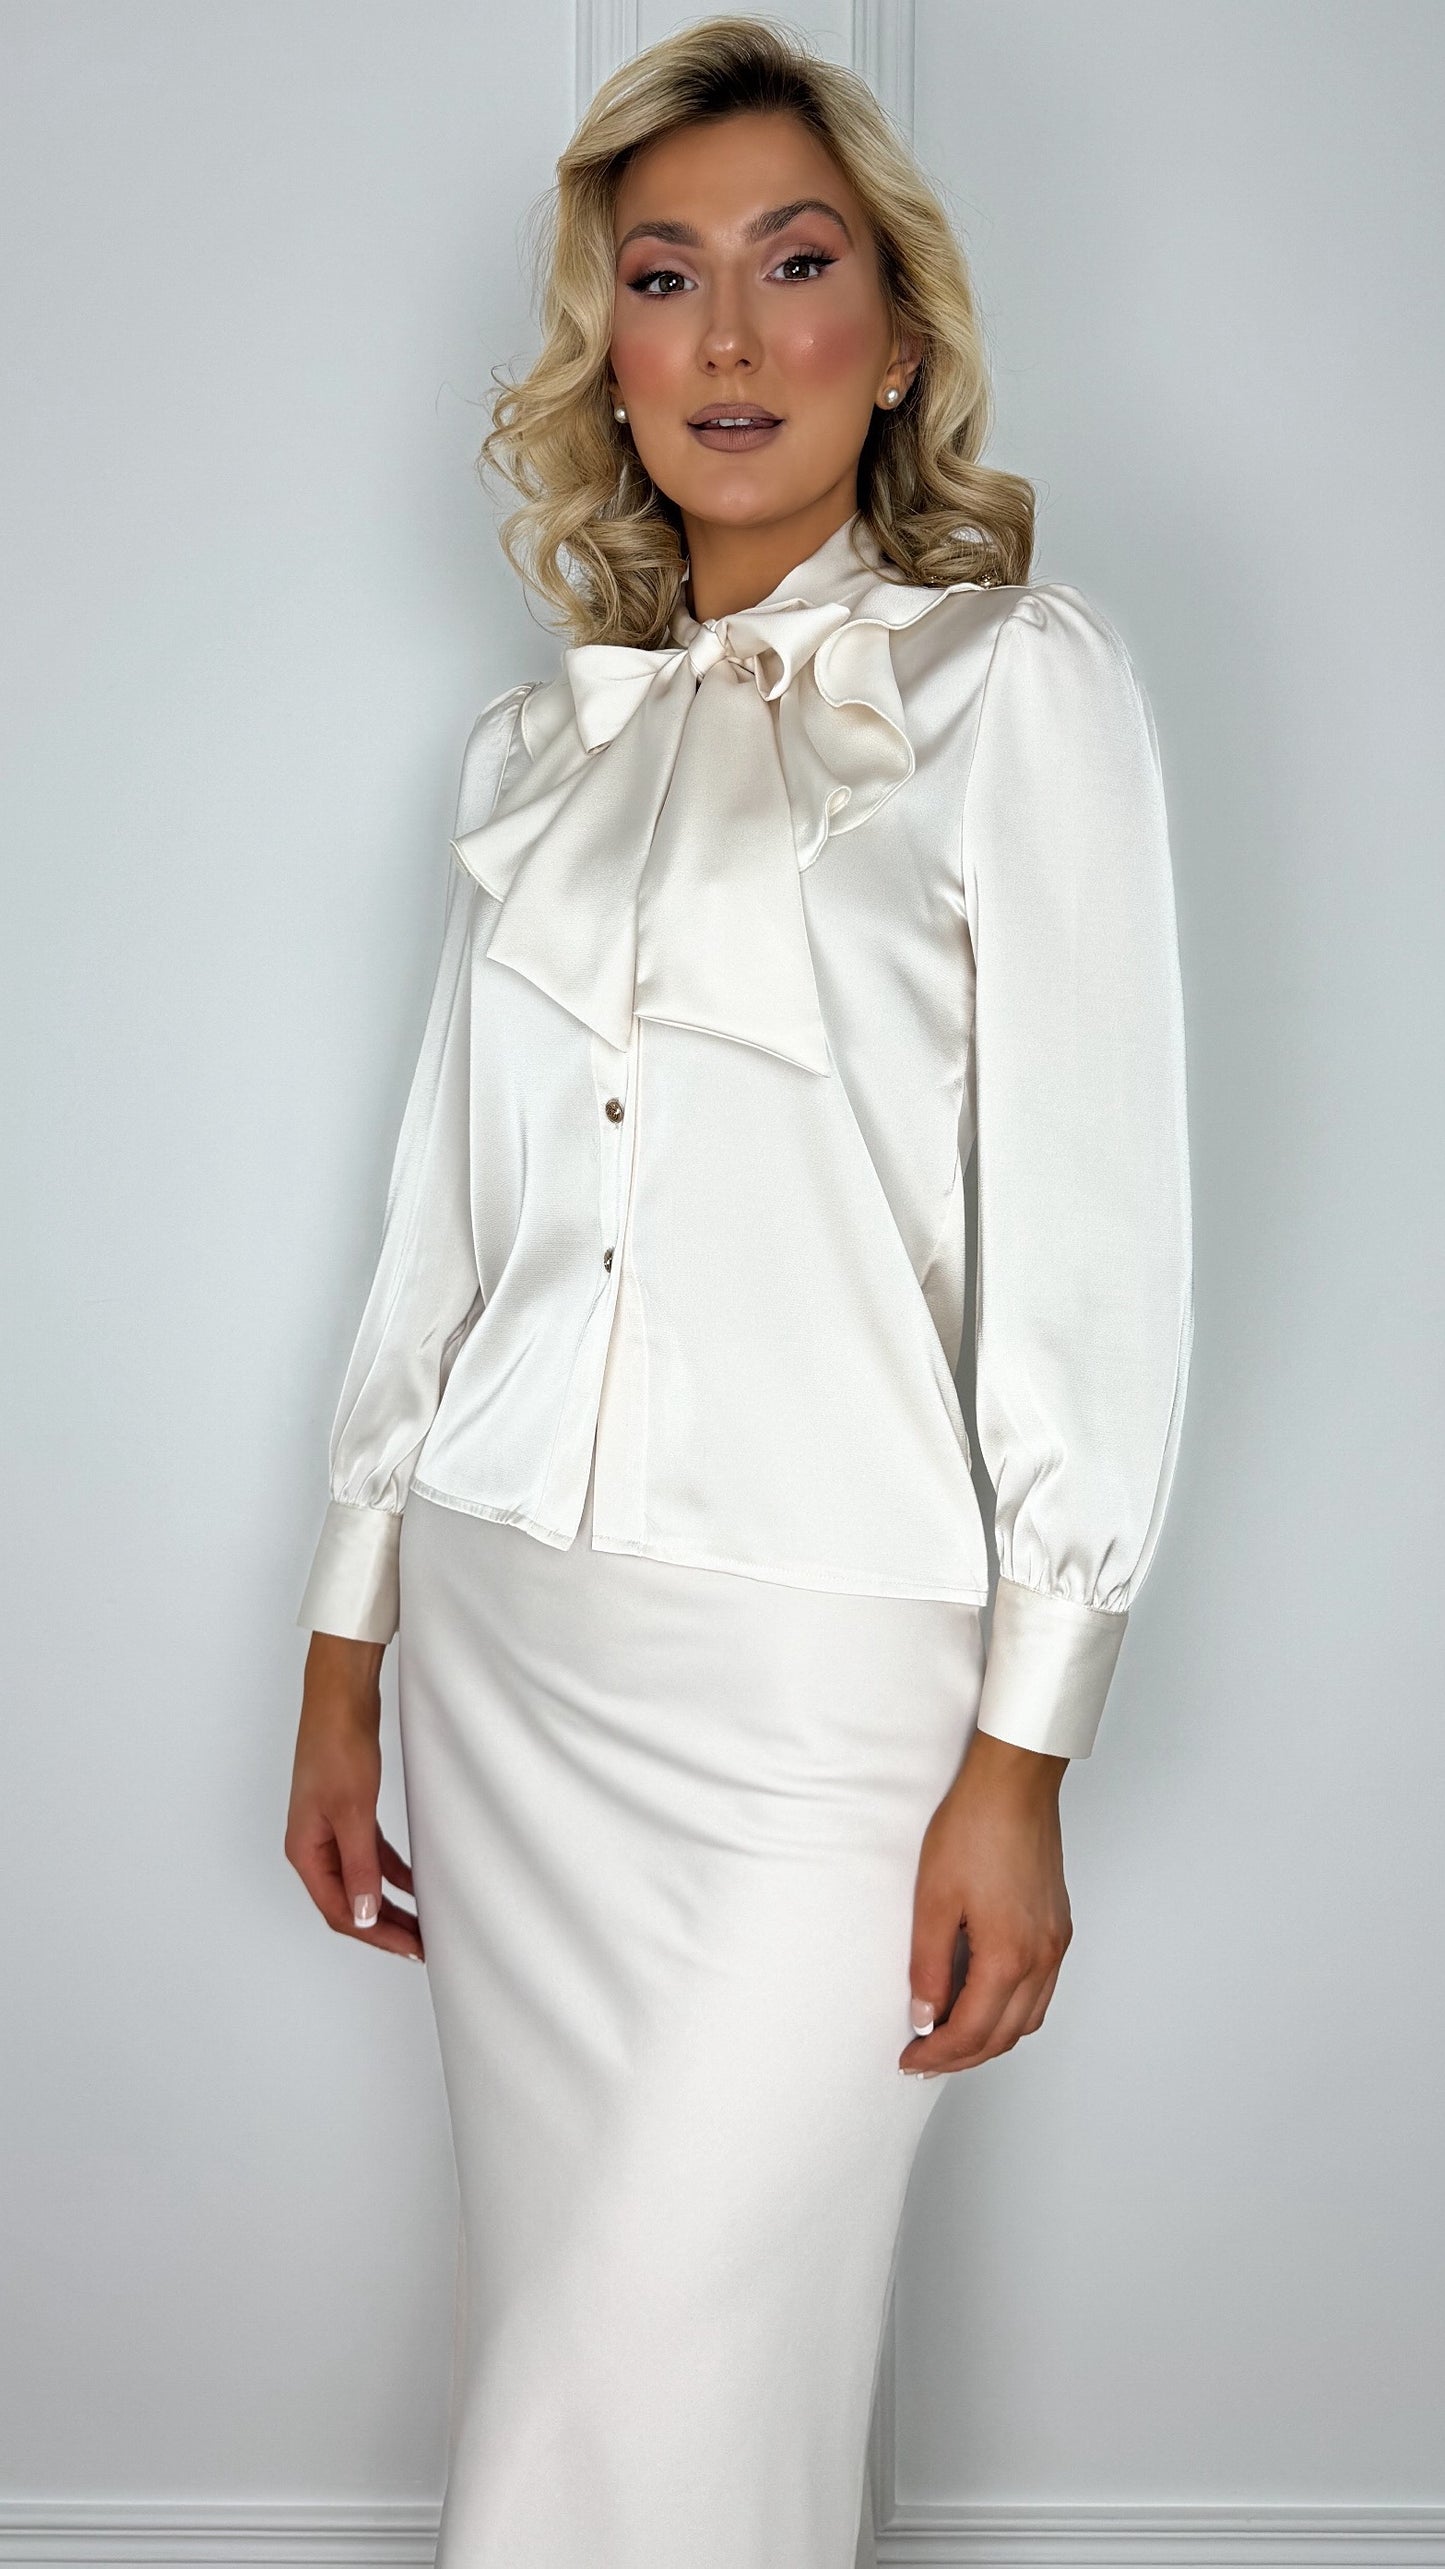 Norah Satin Shirt with Bow Tie - Light Beige